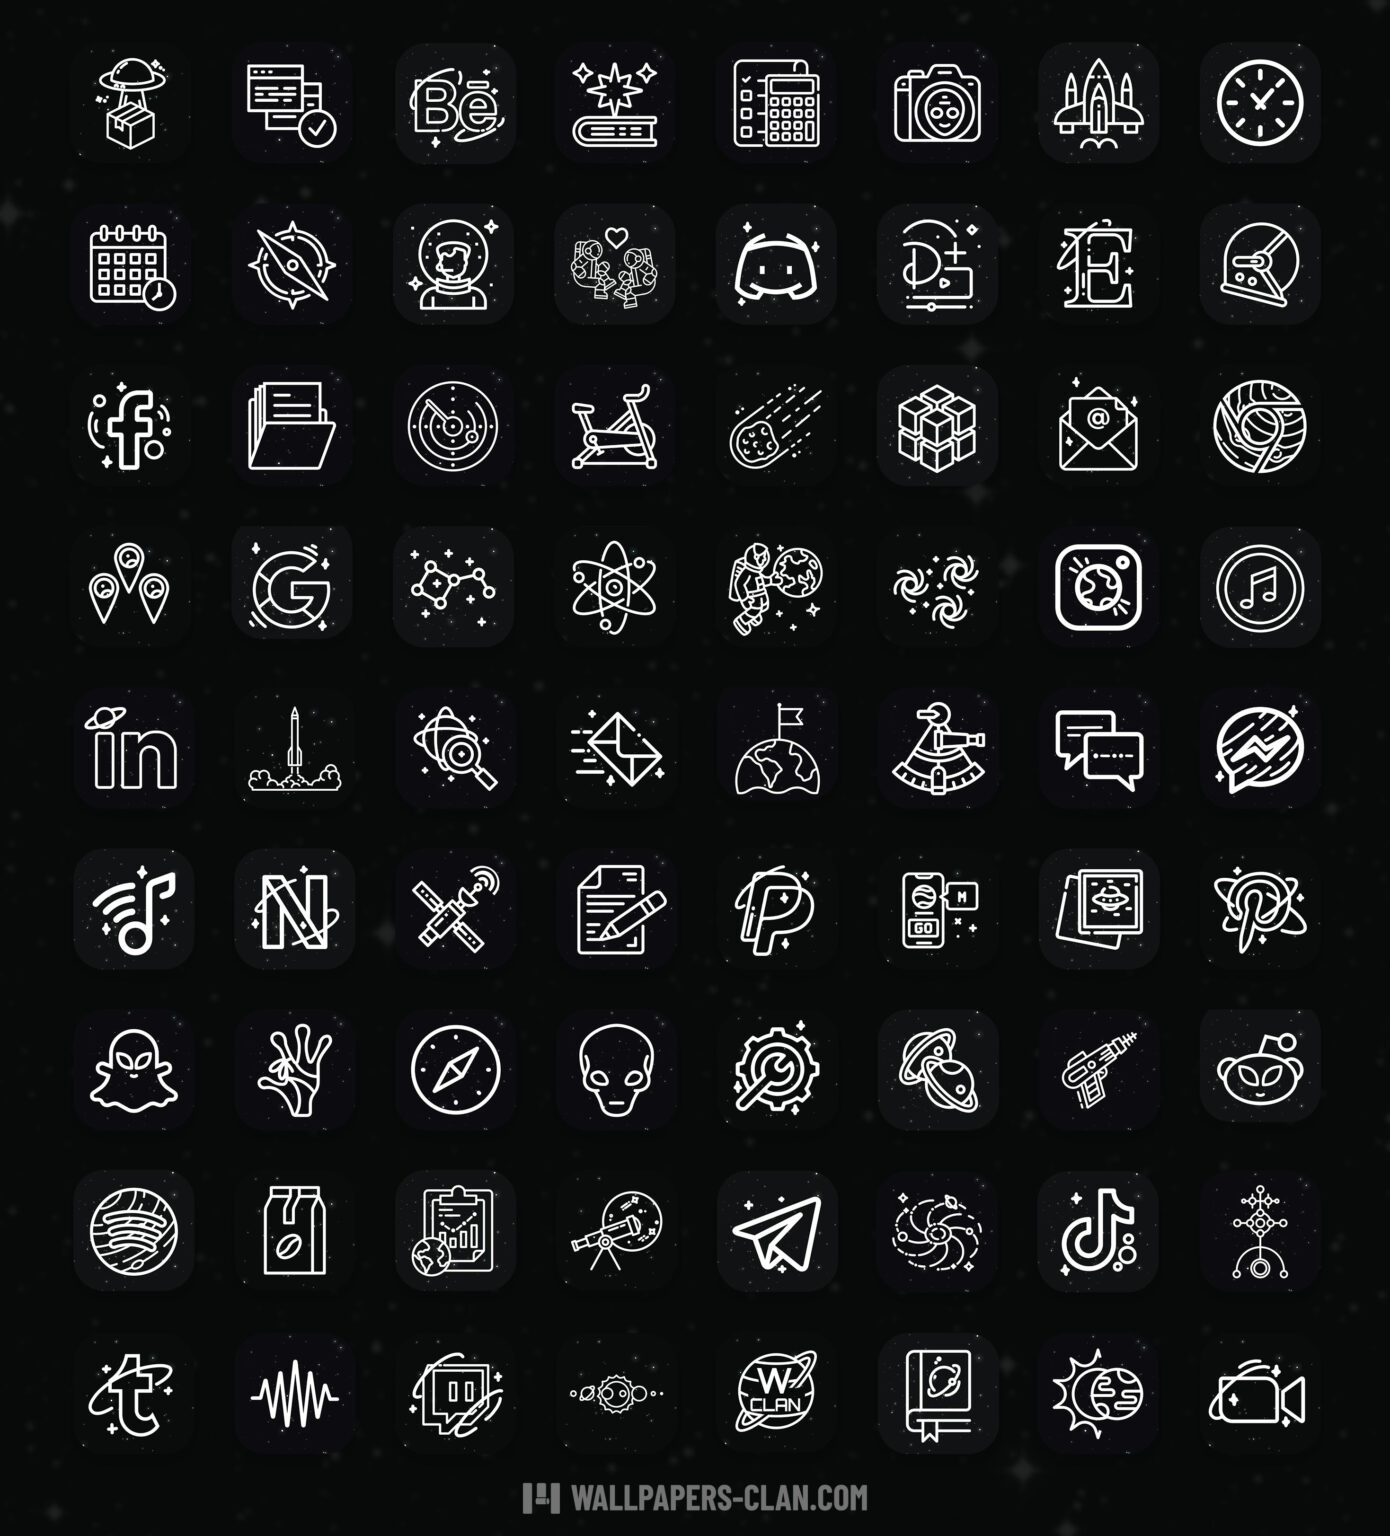 Space App Icons iOS, Android - Black and White App Icons iPhone